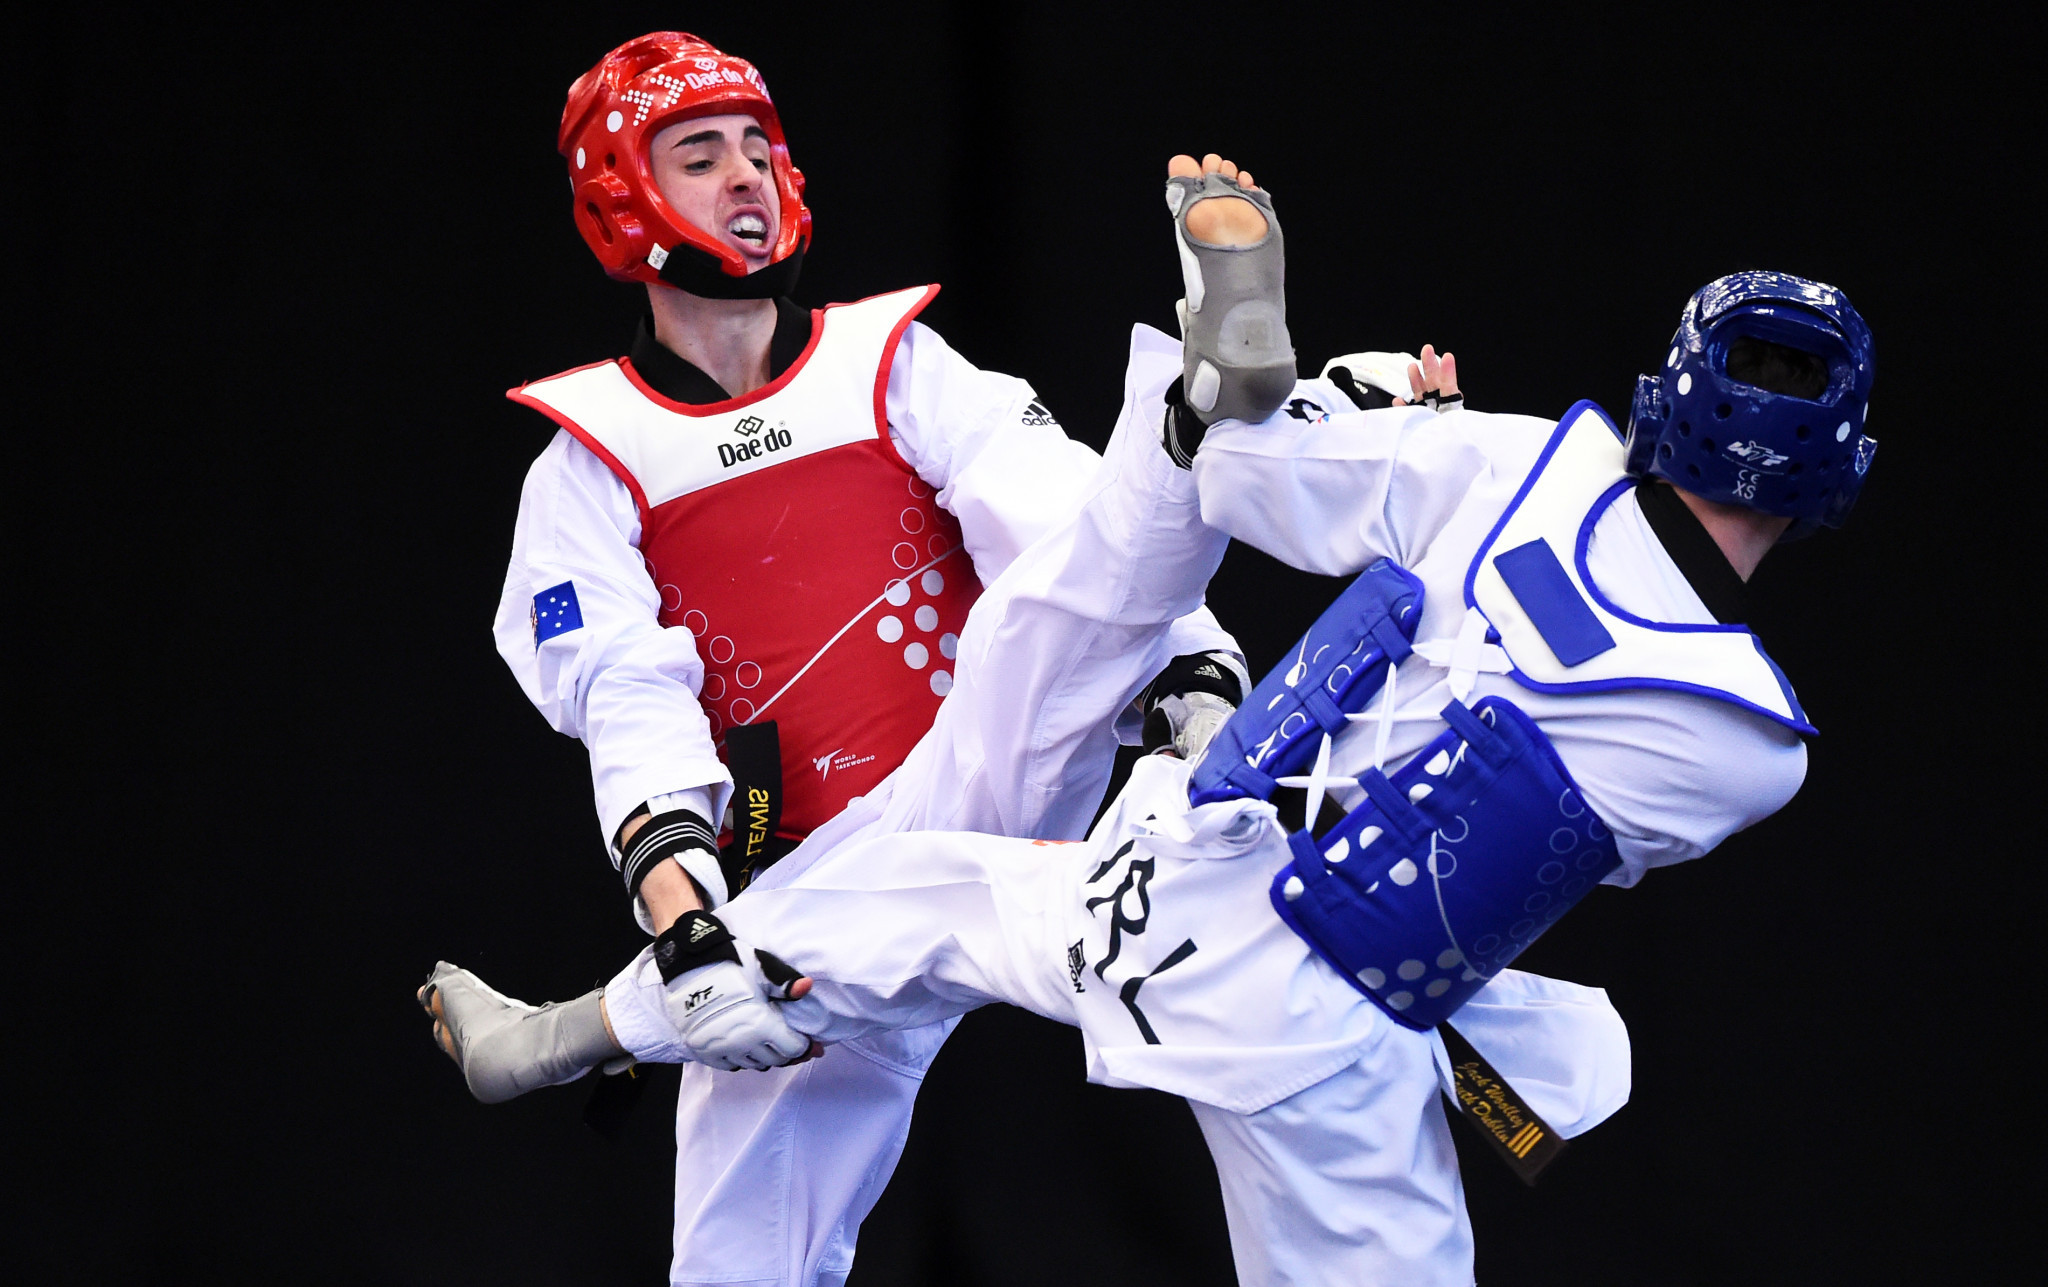 Bailey Lewis is among those to have been named on Australia's team for the 2019 World Taekwondo Championships in Manchester ©Getty Images